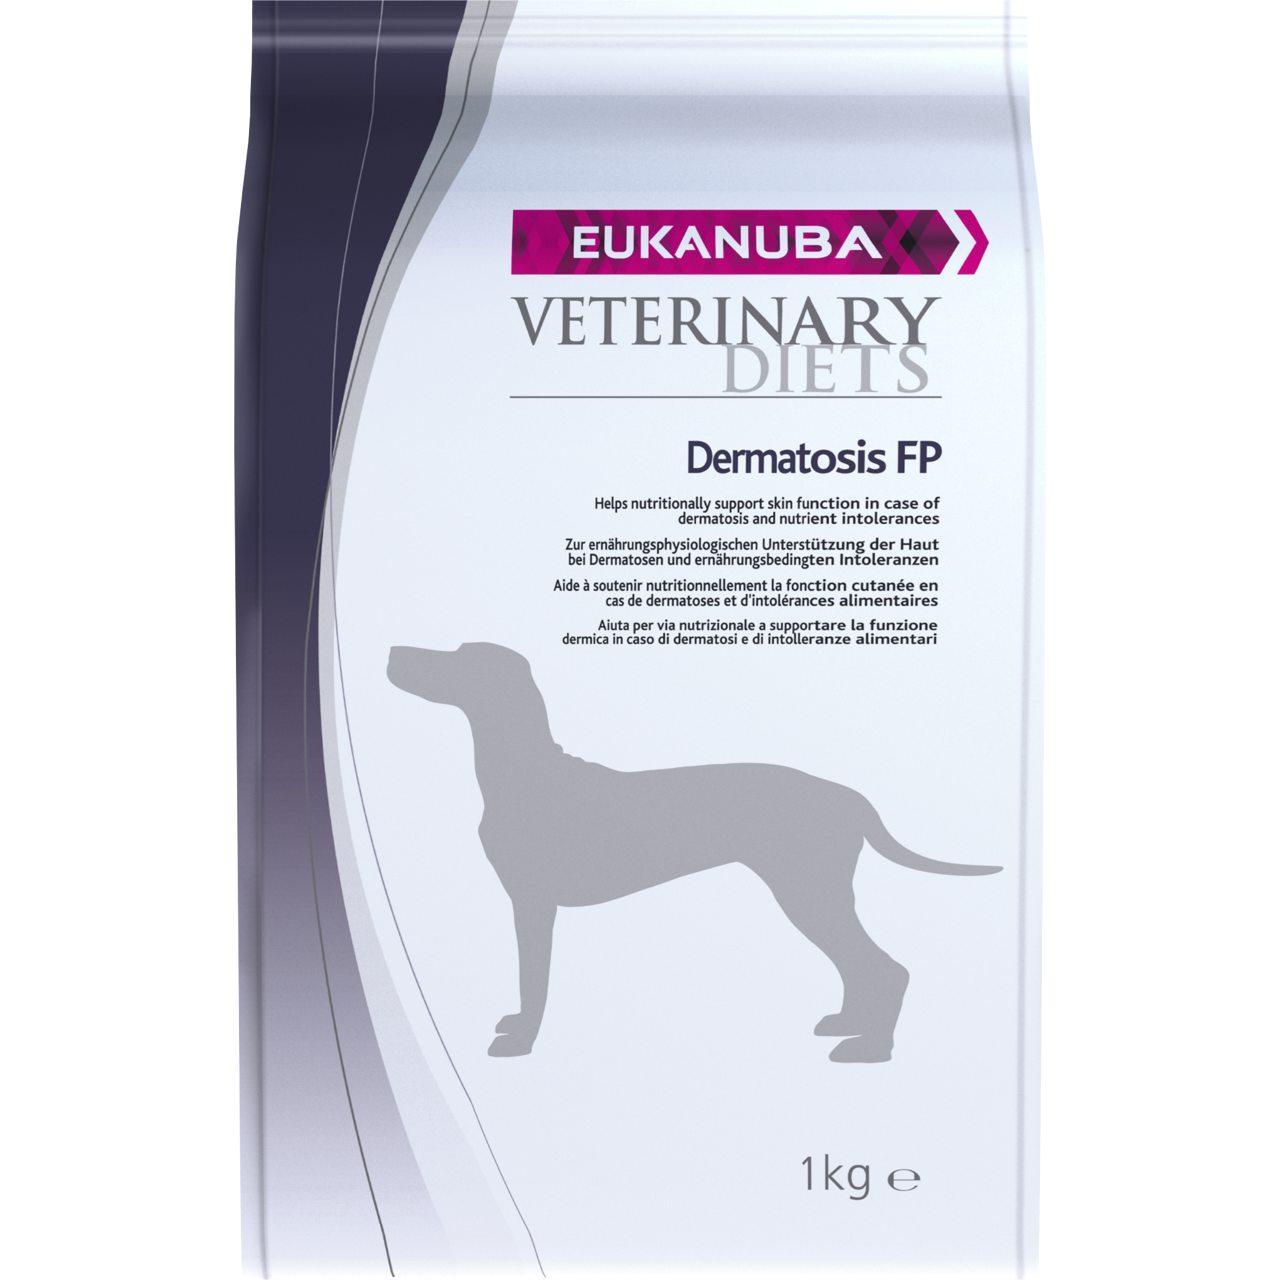 An image of Eukanuba Veterinary Diets Canine Dermatosis FP